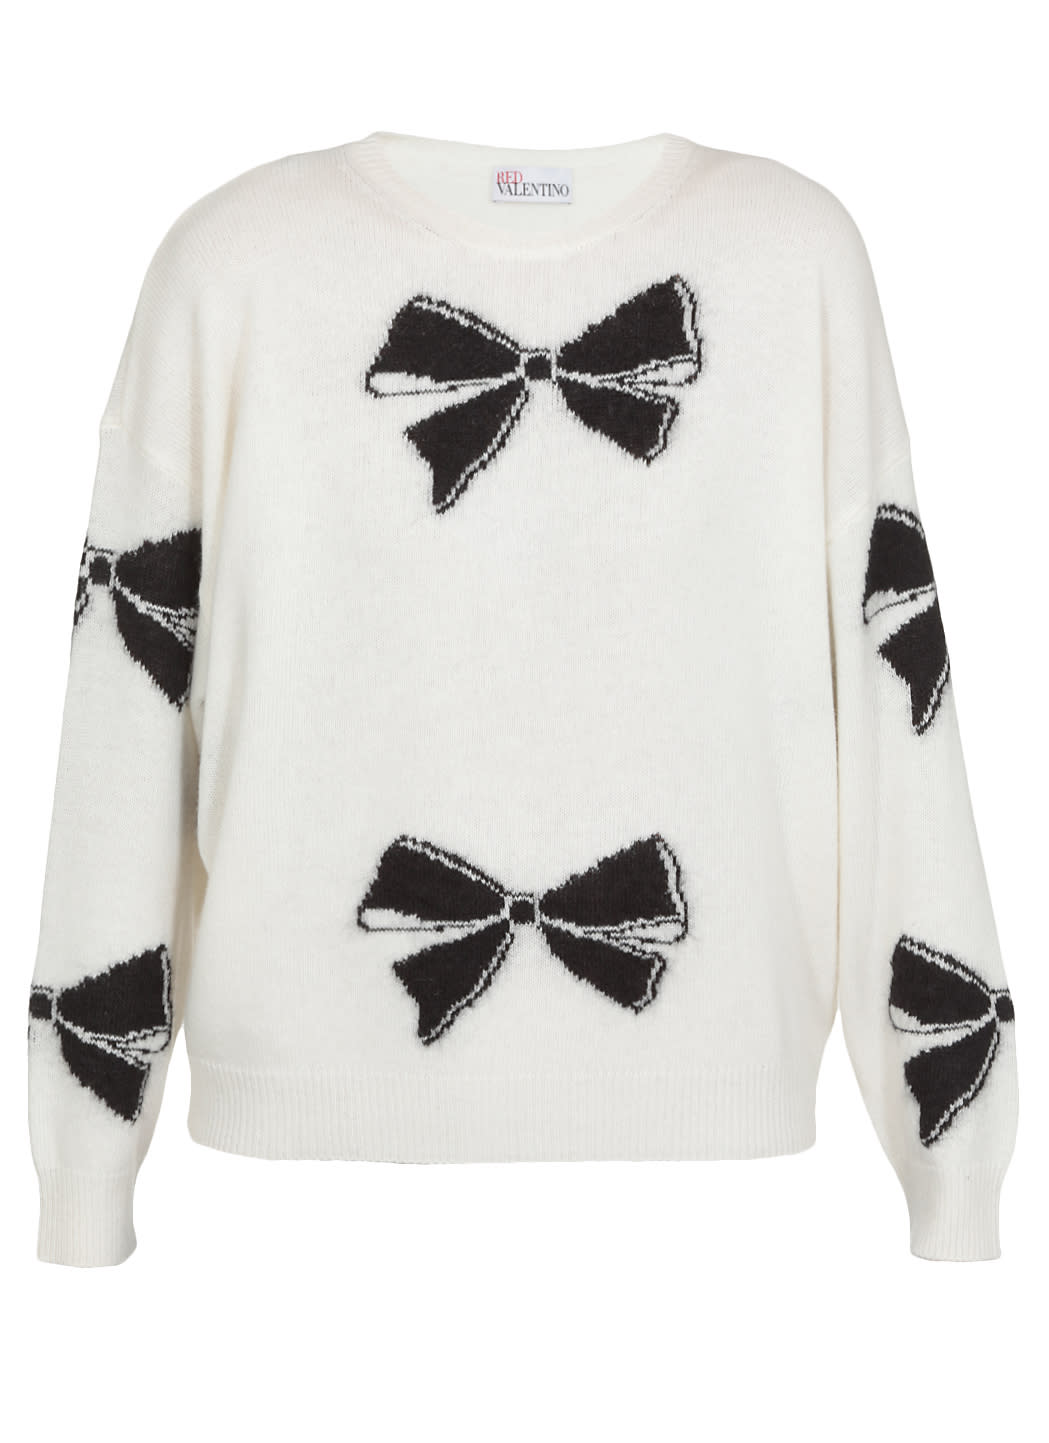 RED Valentino Sweater With Bows Pattern